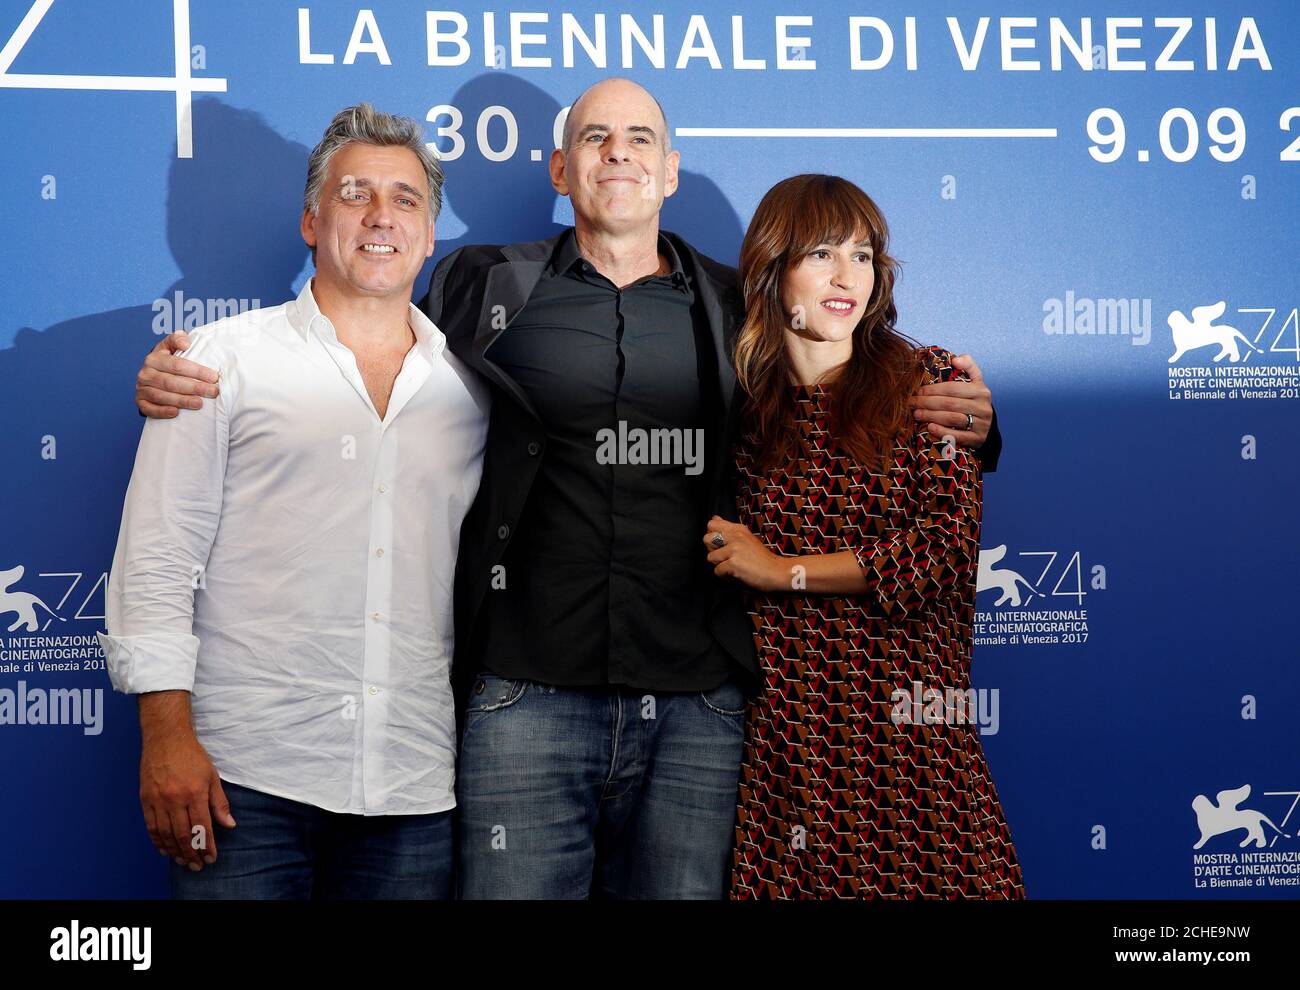 Director Samuel Maoz poses with actors Lior Ashkenazi and Sara Adler during a photocall for the movie 'Foxtrot' at the 74th Venice Film Festival in Venice, Italy September 2, 2017. REUTERS/Alessandro Bianchi Stock Photo